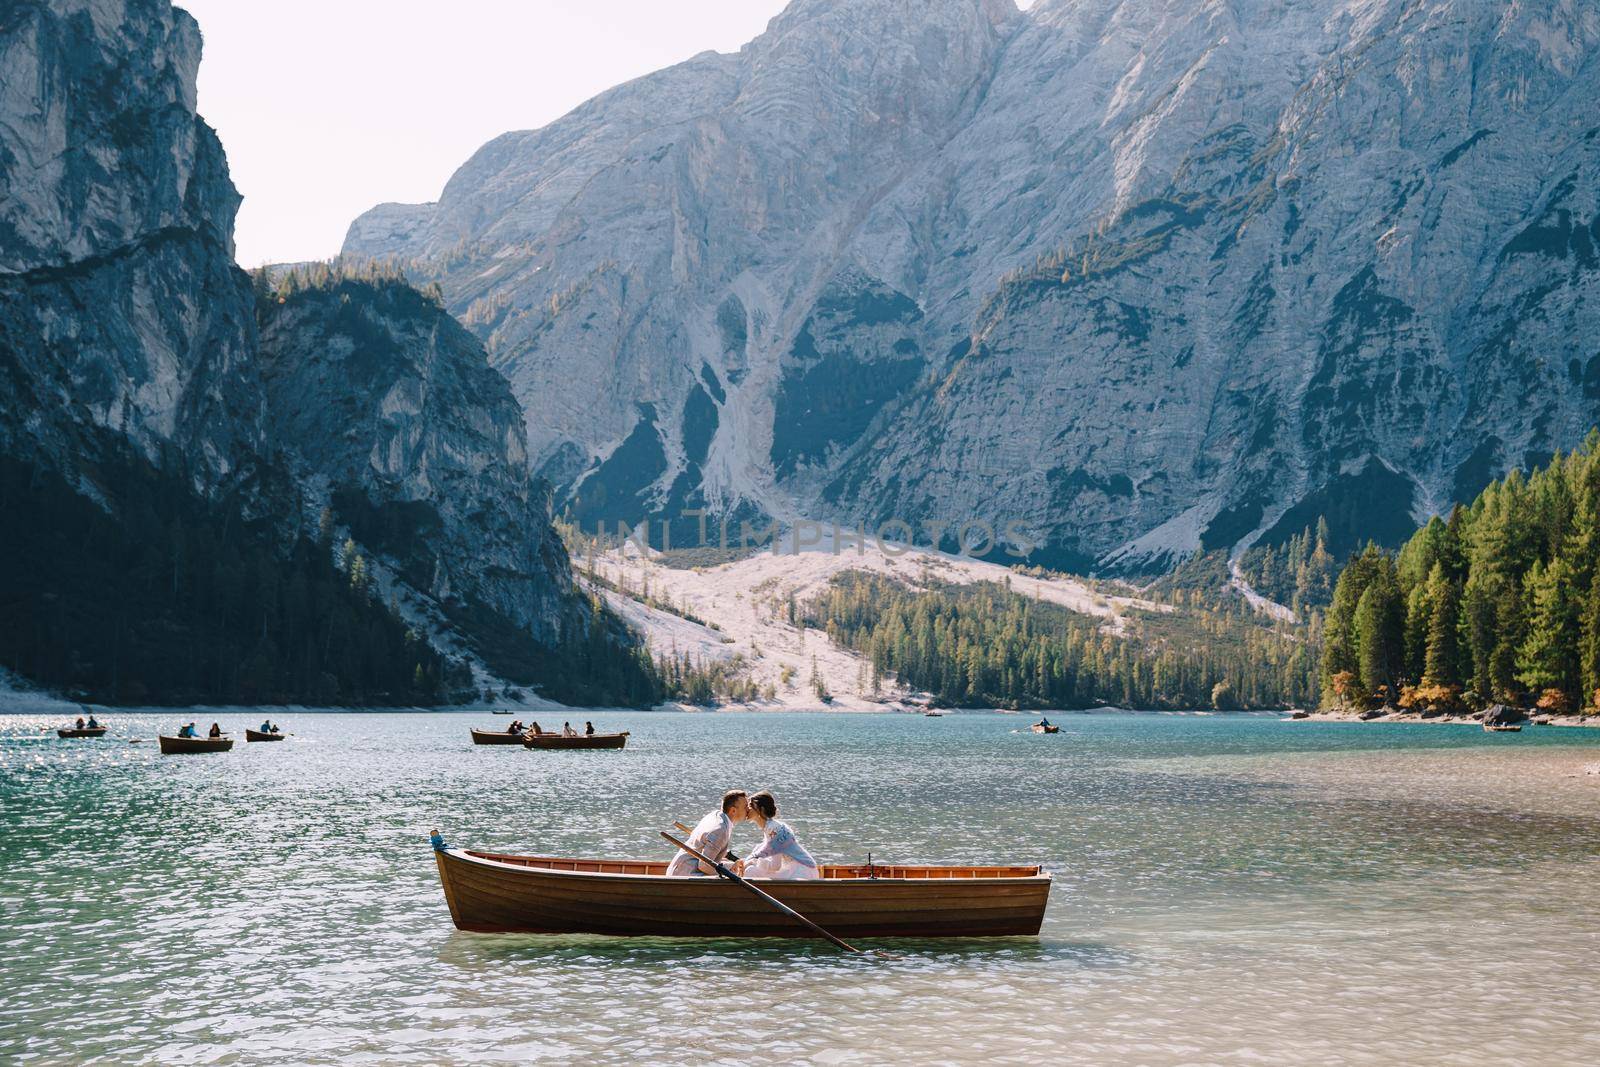 Bride and groom sail in a wooden boat at the Lago di Braies in Italy. Wedding in Europe, on Braies lake. The newlyweds are sitting in the boat and kissing. by Nadtochiy